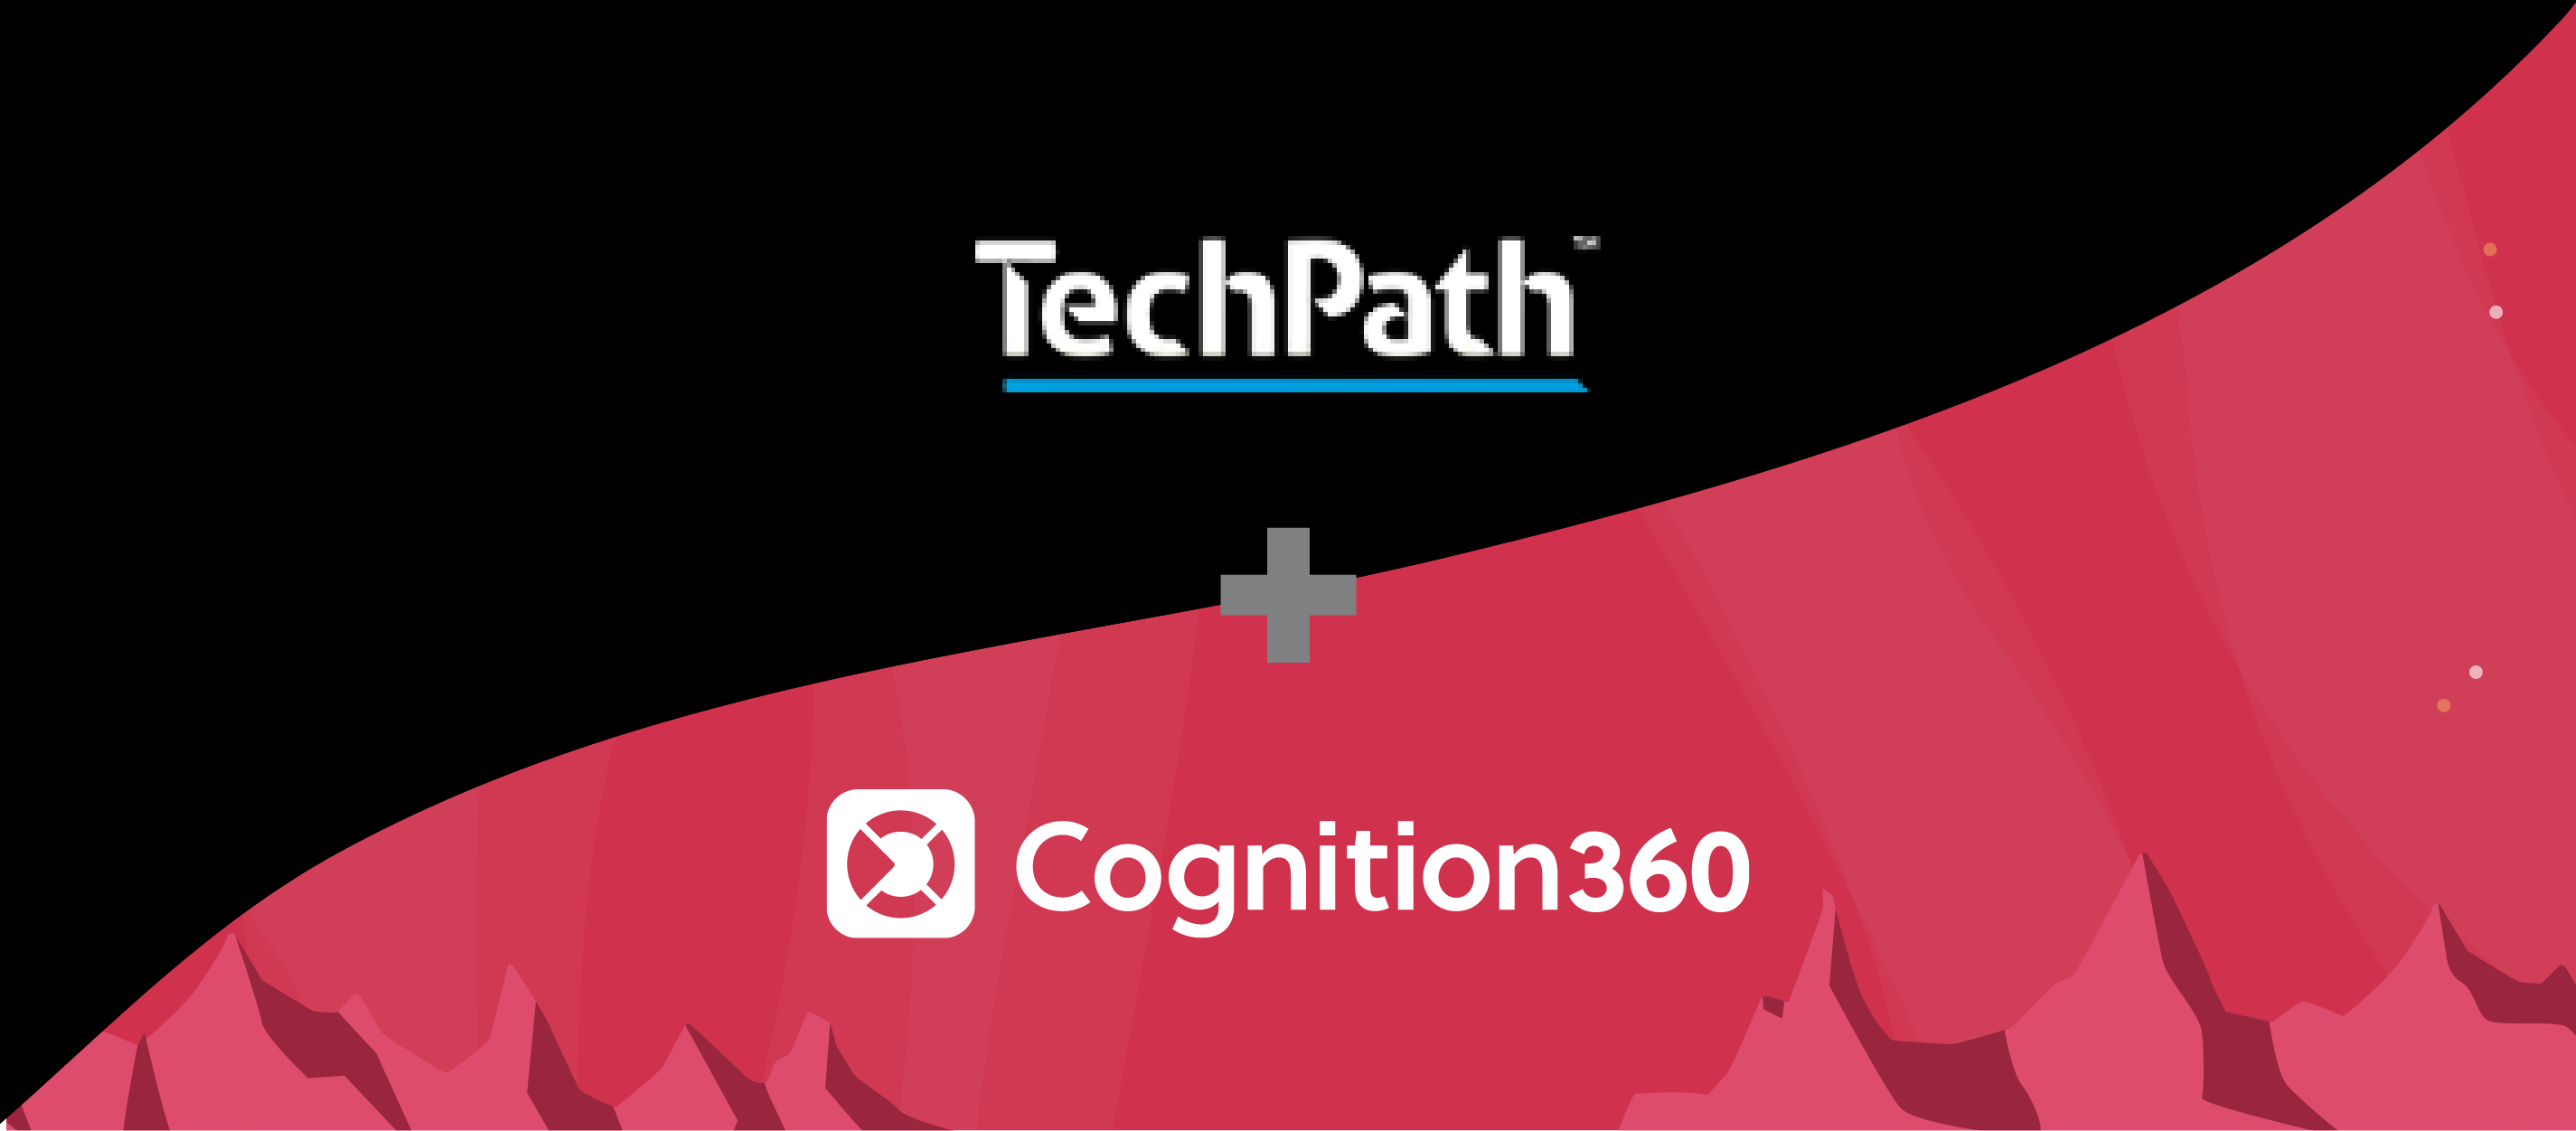 Cognition360, Business Intelligence, TechPath, Case study